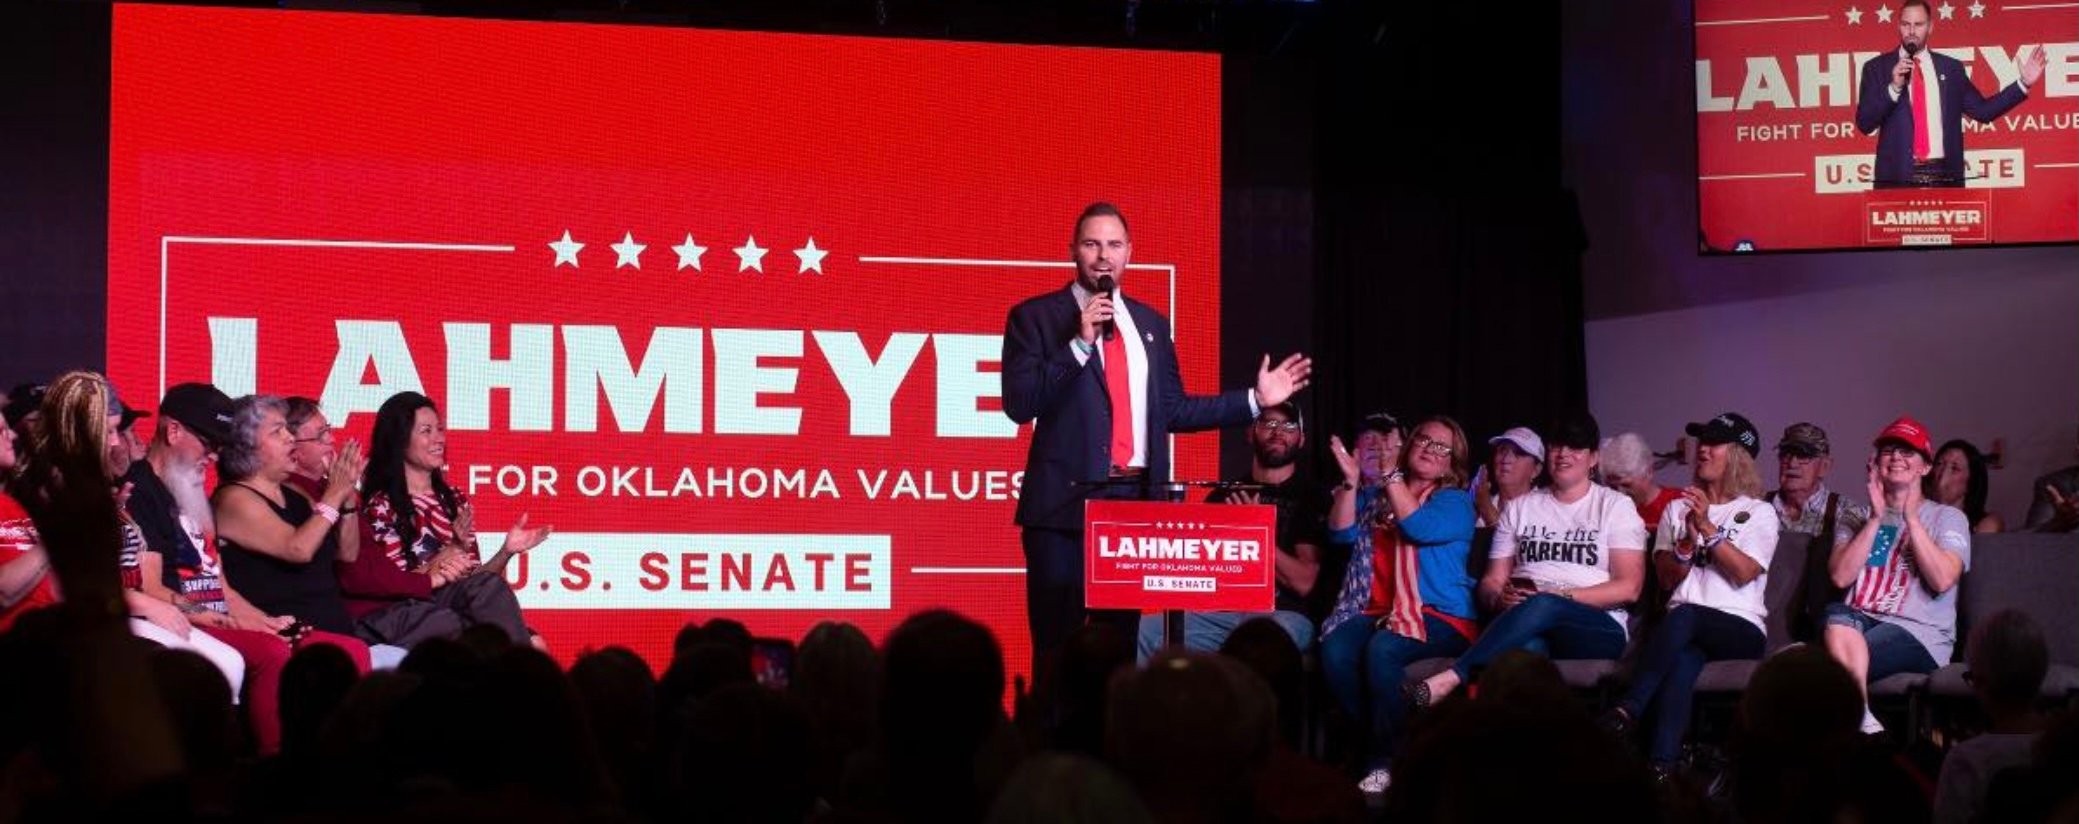  (VIDEO) U.S. Senate Candidate Jackson Lahmeyer Endorsed By AZ State Senator Wendy Rogers – Audit The Vote Rally: “Top Priority – Election Integrity – We Need An Audit In All 50 States”